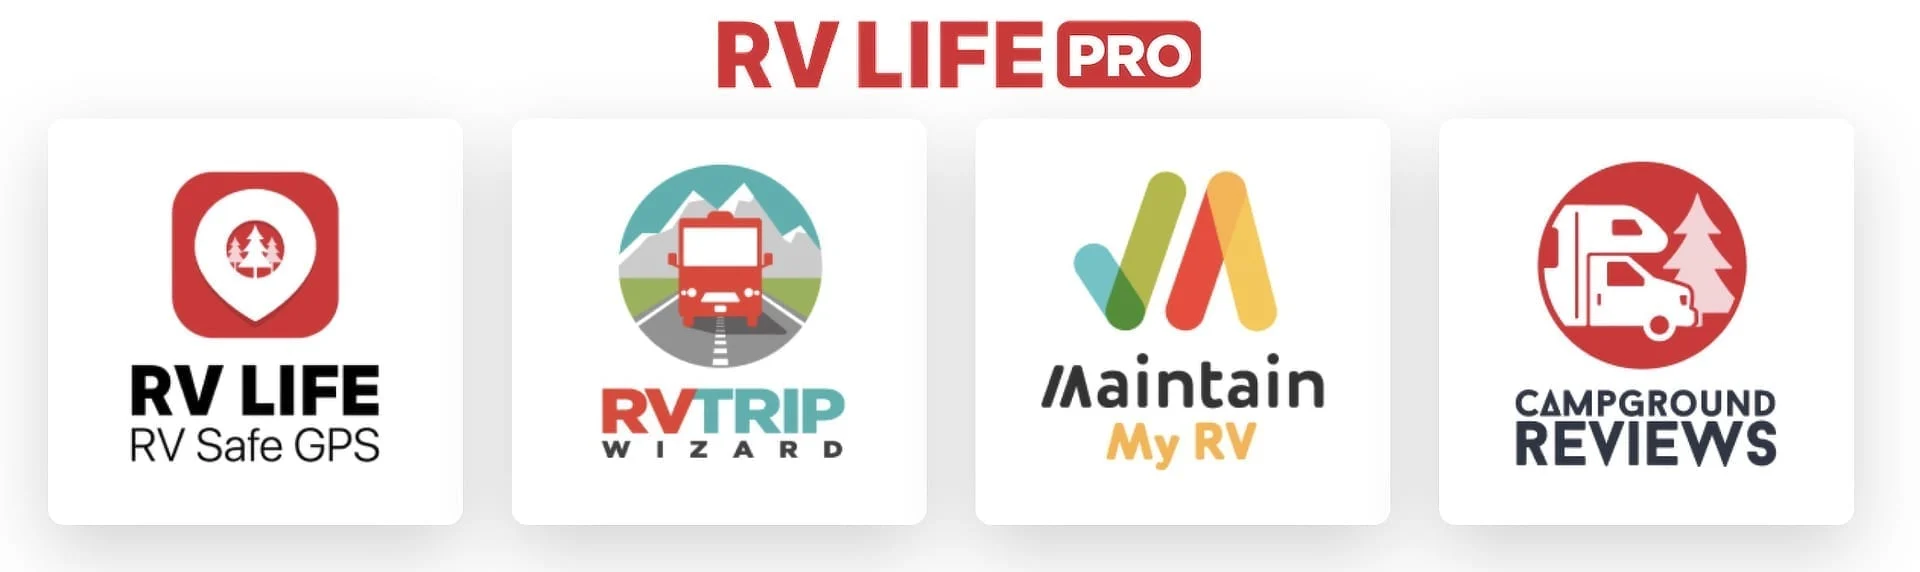 RV Life Pro offers access to many useful apps